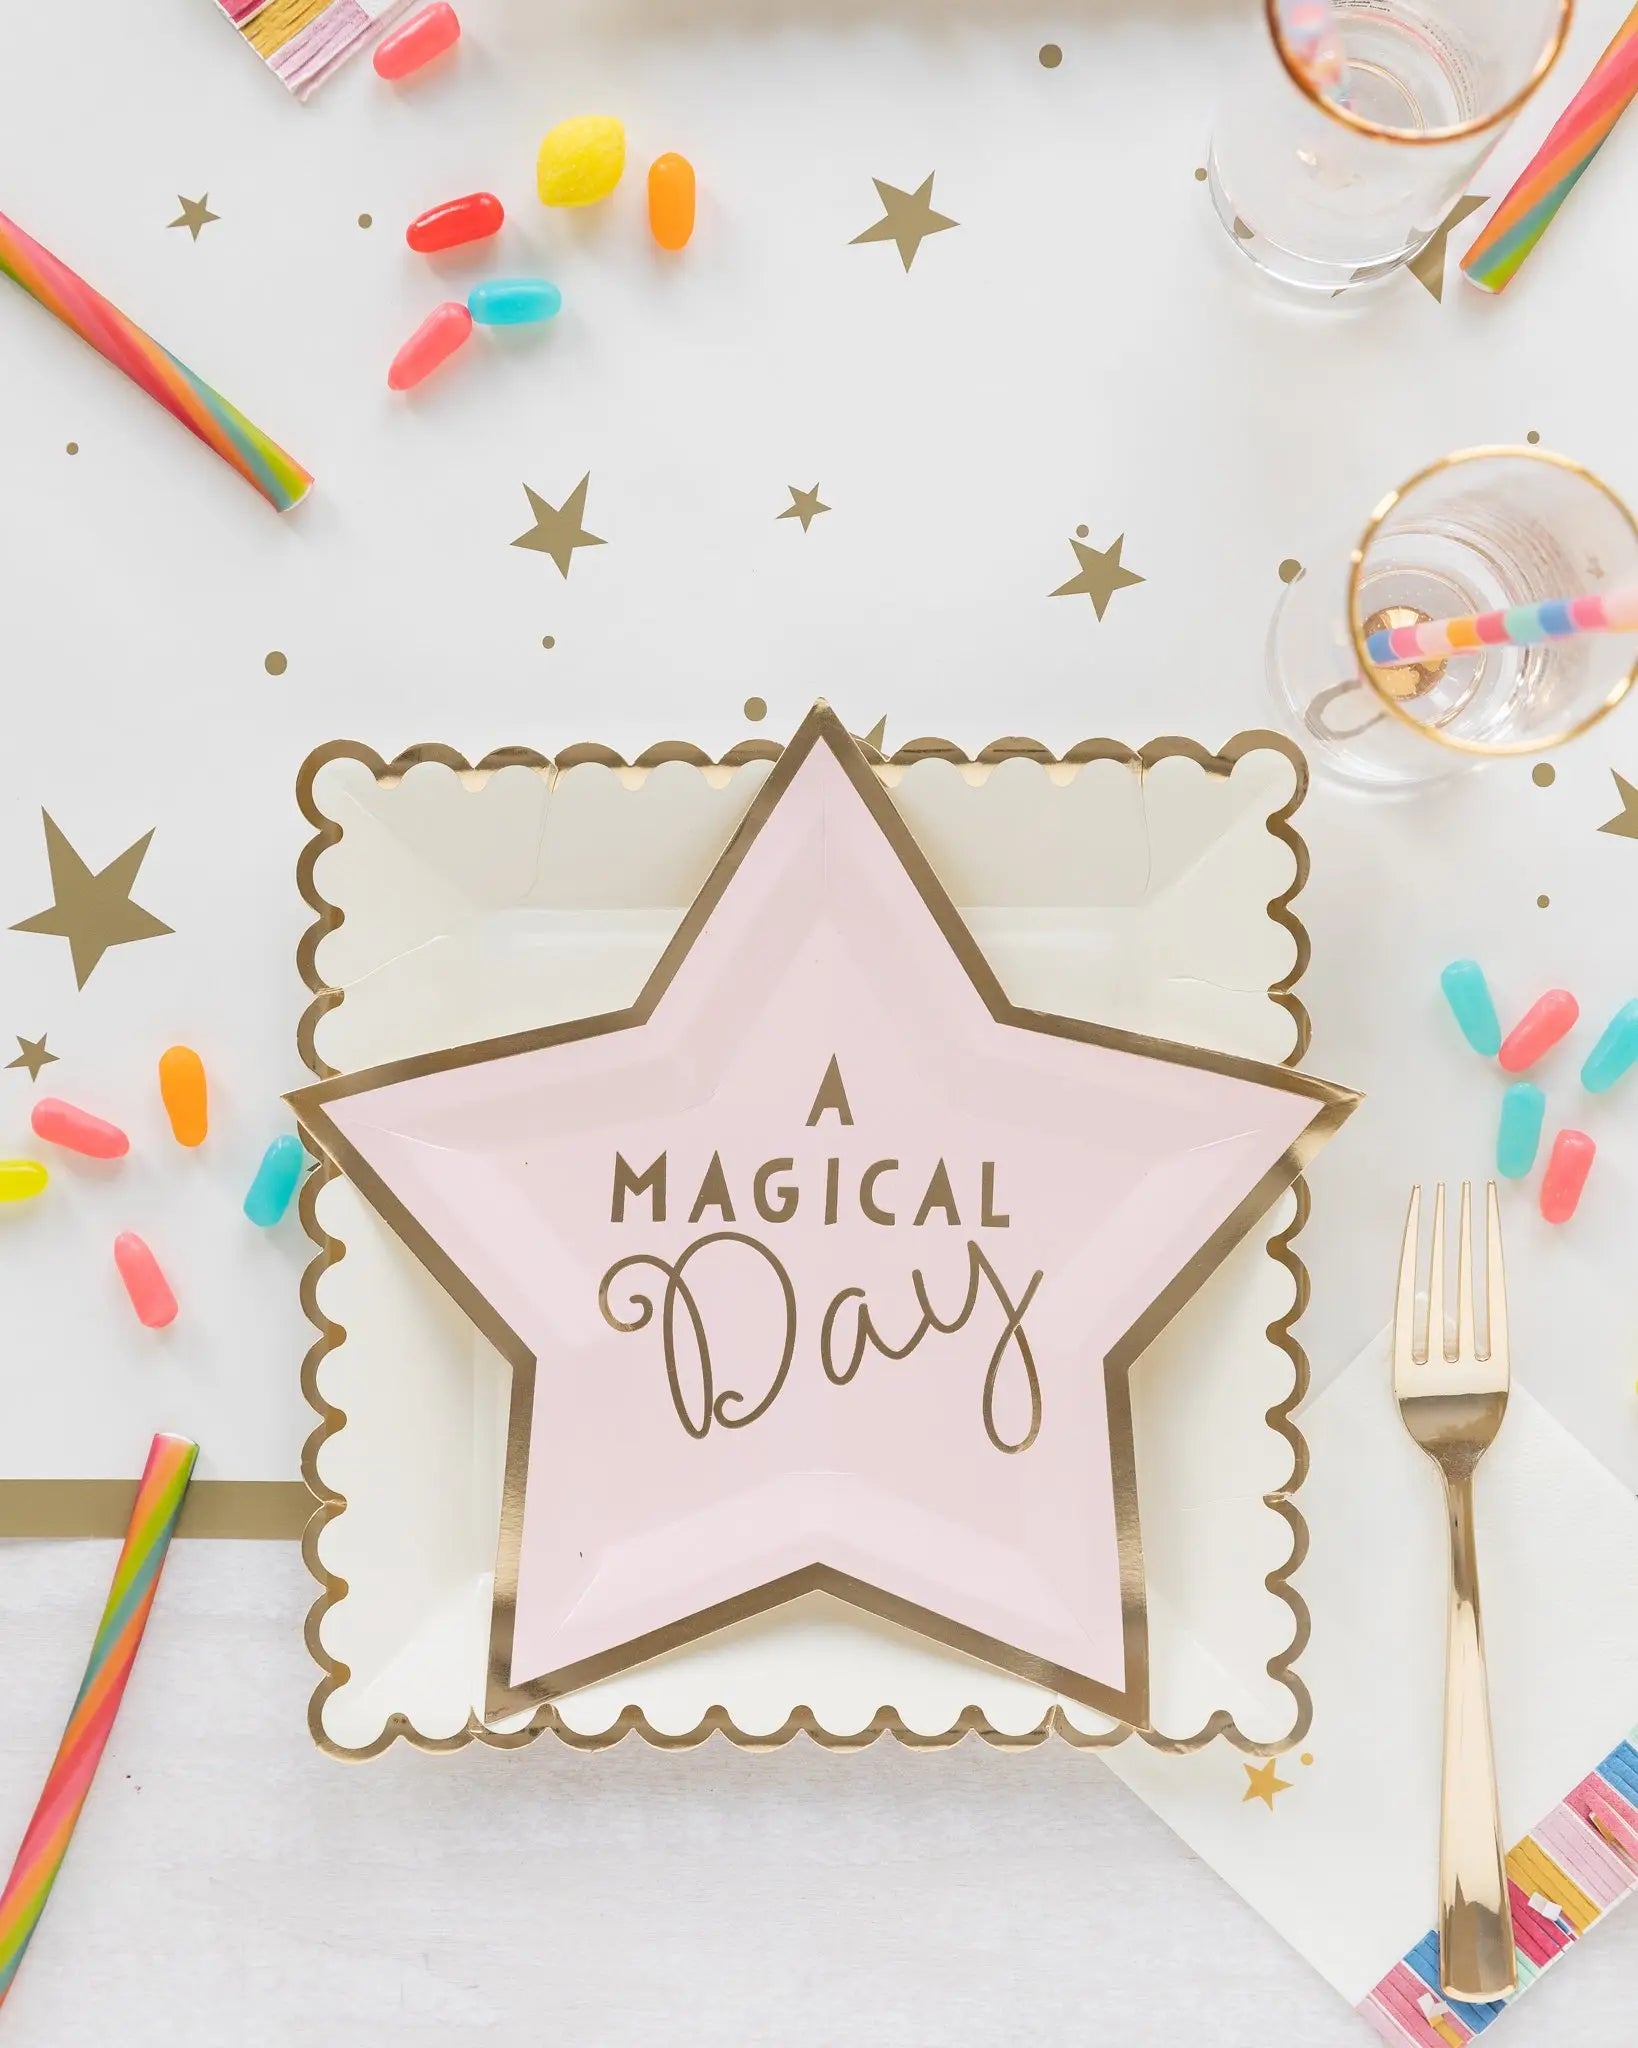 Magical Star 7" Plates by My Mind’s Eye. Magical Day Paper Plates. Pink Plates. Baby Shower Plates. Celebration Plates